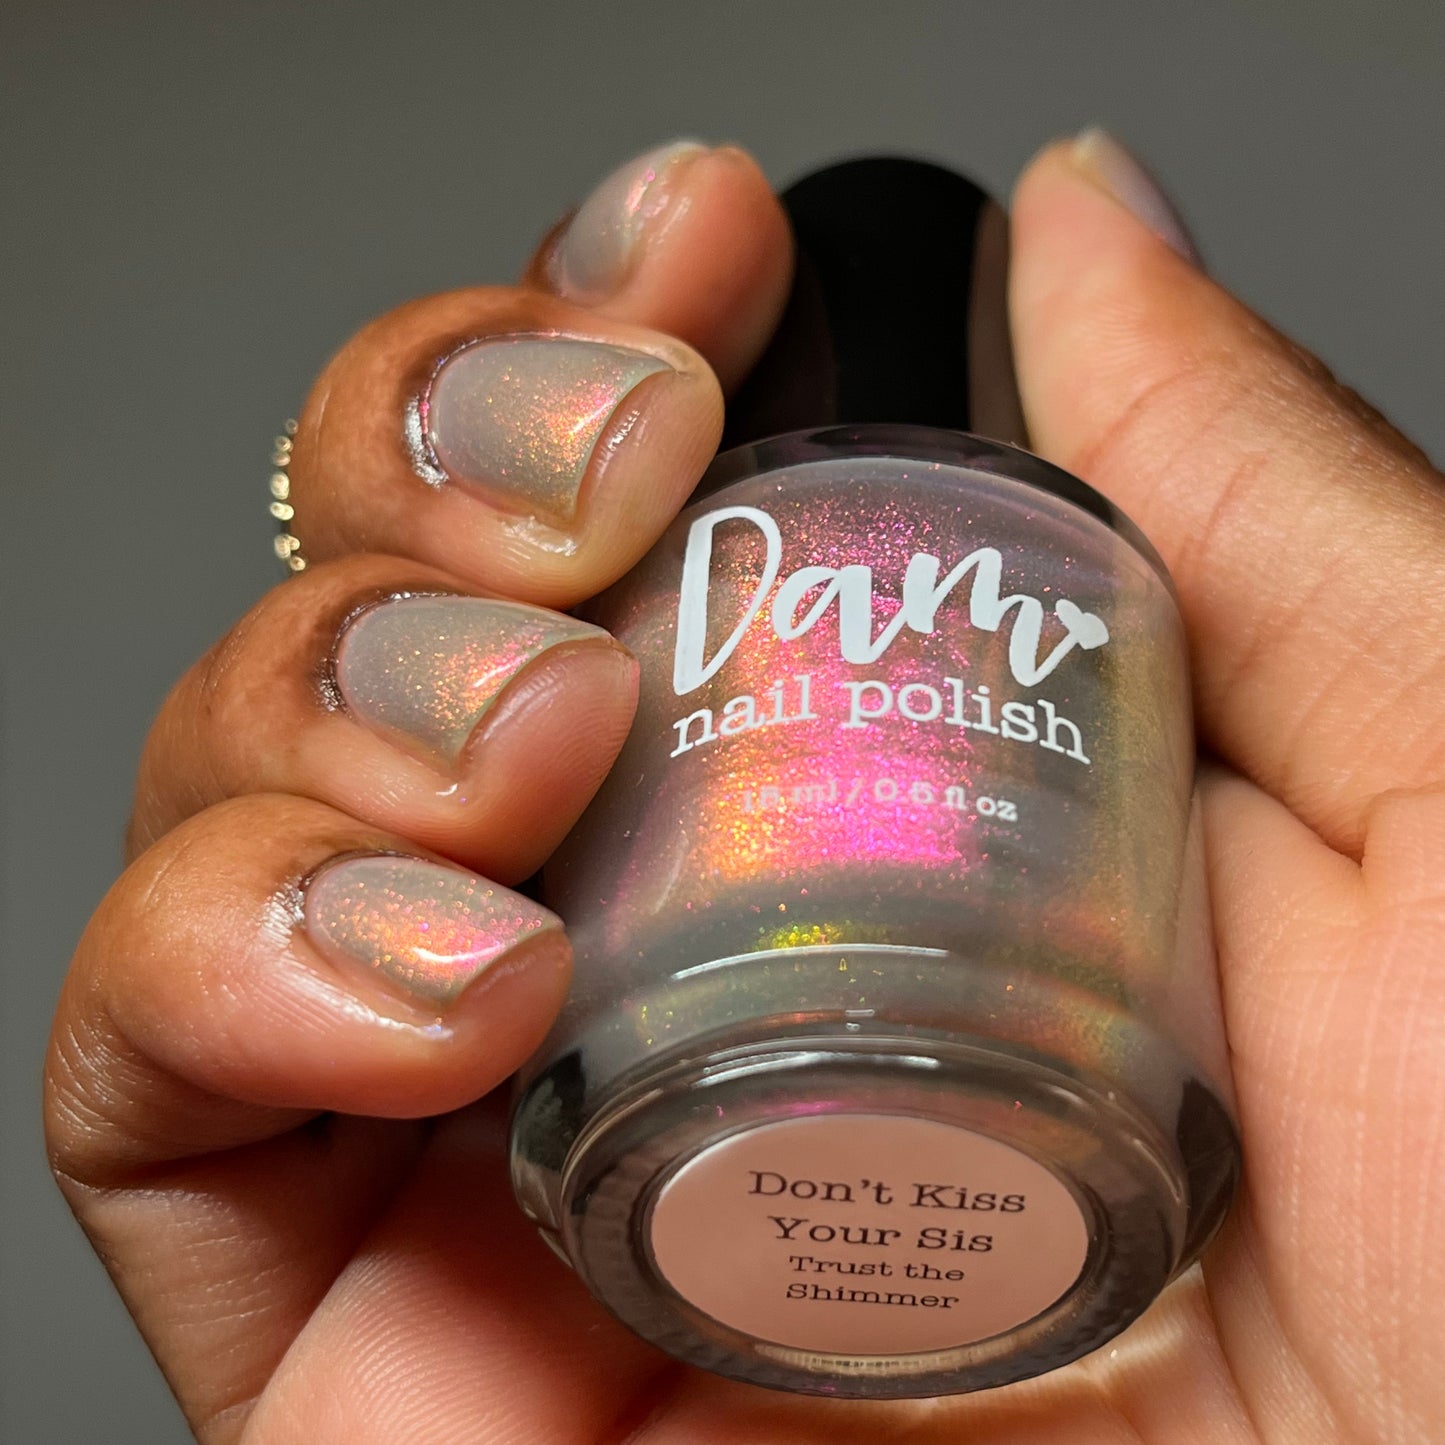 Don’t Kiss Your Sis - Pink Shimmer Nail Polish - Trust the Shimmer Collection